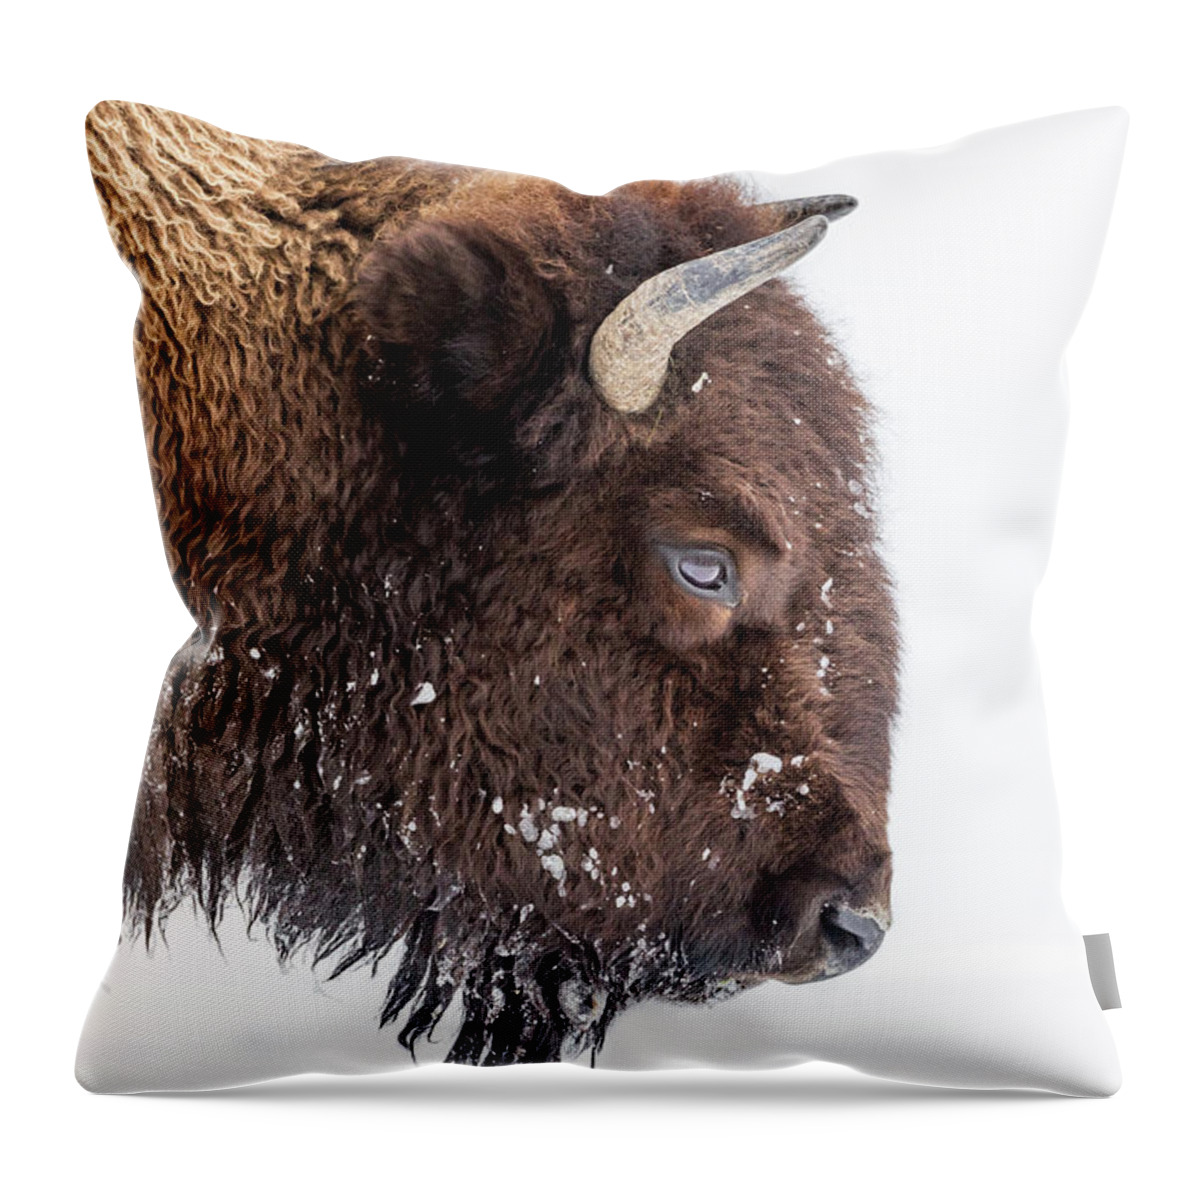 Vertebrate Throw Pillow featuring the photograph Bison In Winter by Kencanning